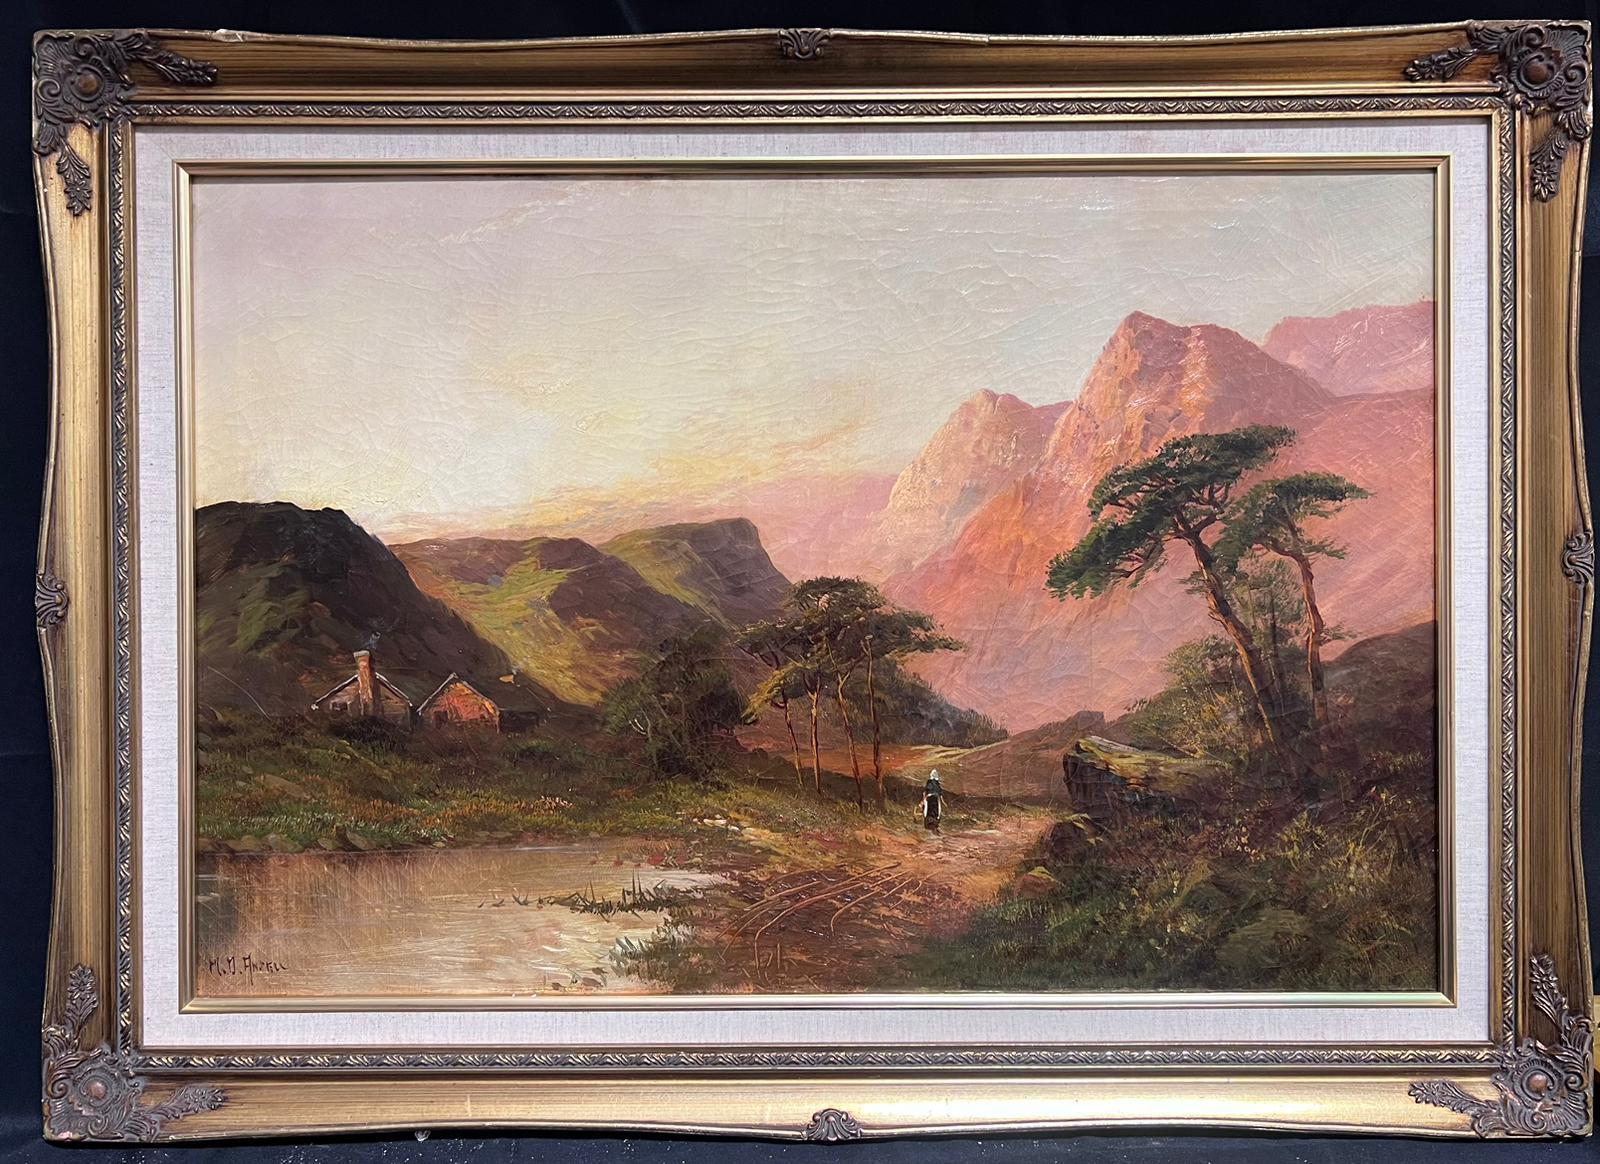 The Highland Glen
by F. E. Jamieson (British 1895-1950)
signed with pseudonym
oil painting on canvas, framed
framed: 25.5 x 35 inches
canvas : 20 x 30 inches
provenance: private collection, UK
condition: very good and sound condition 
